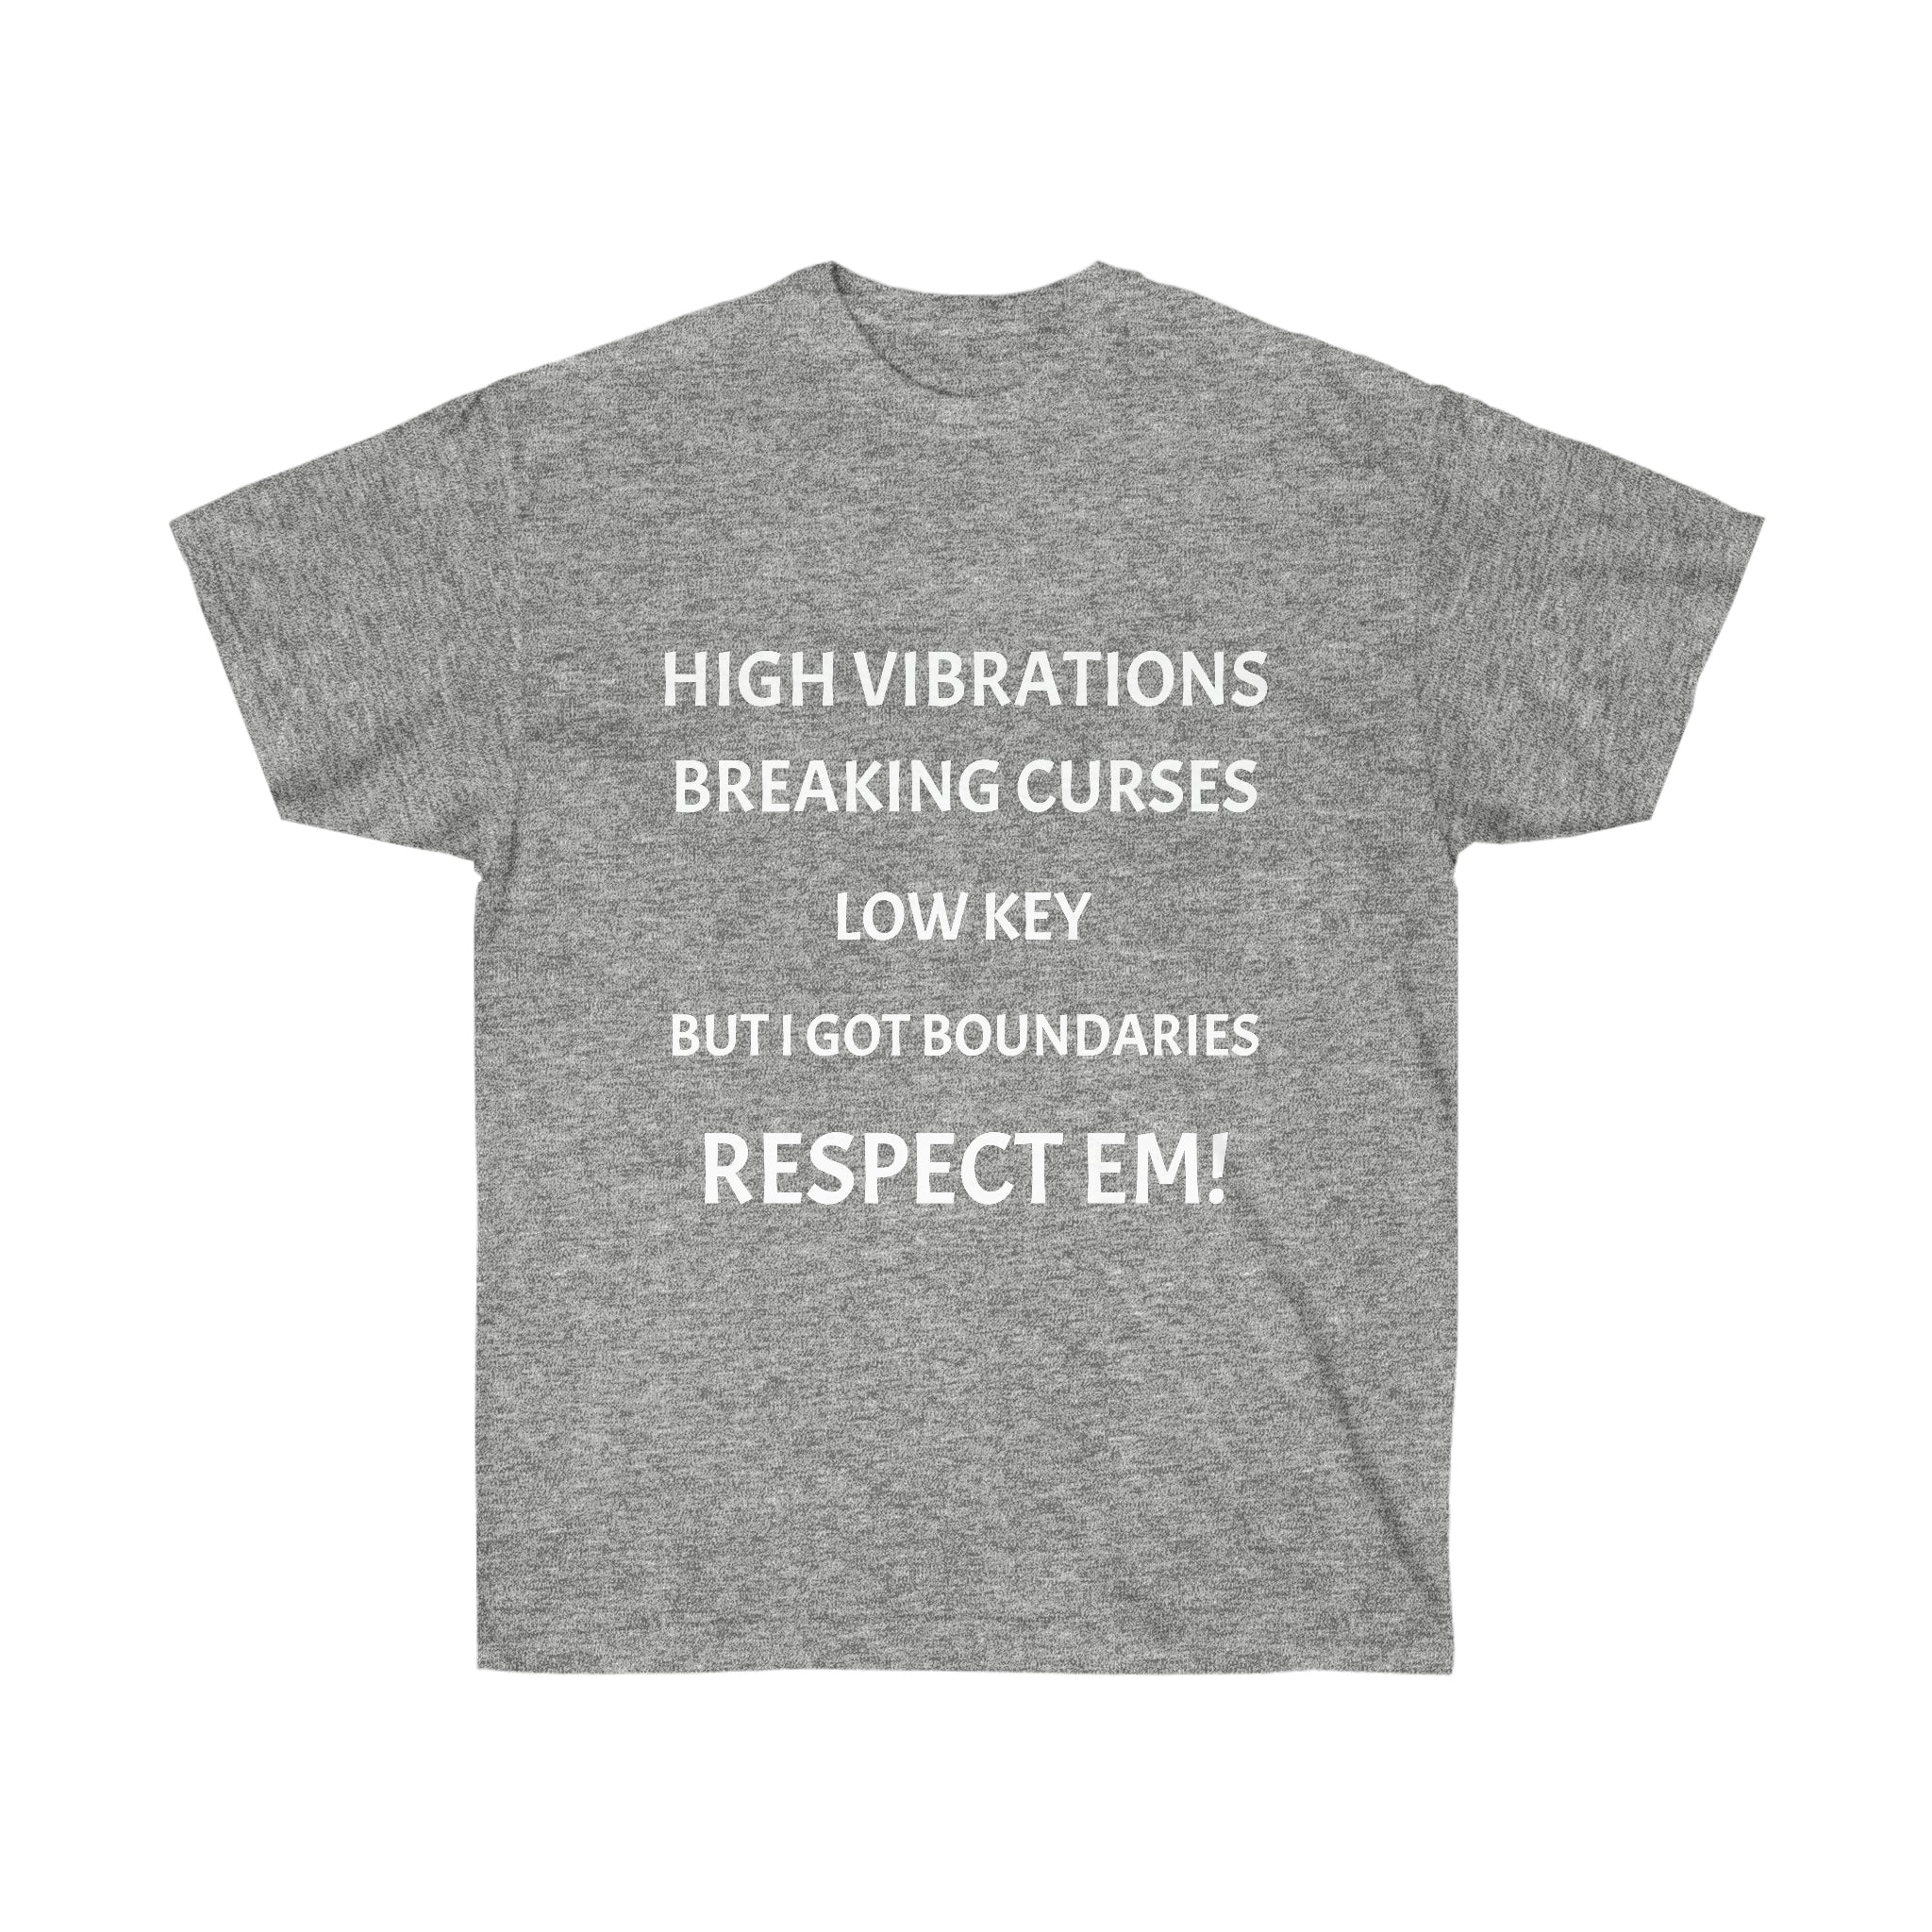 T. White High Vibrations Tee (COC)